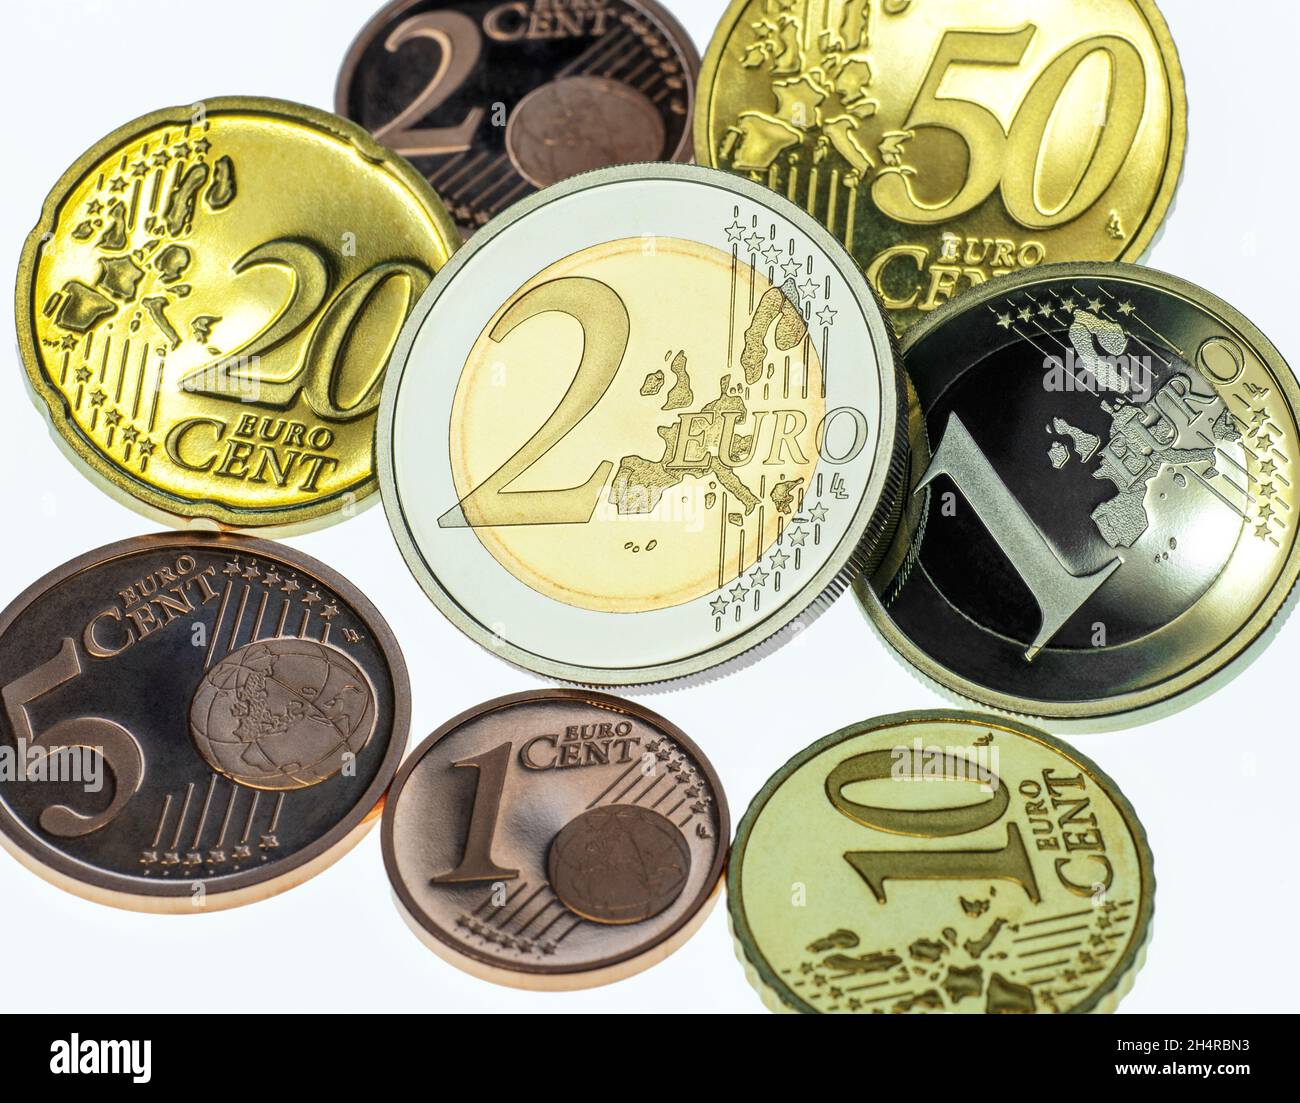 Euro coins with 2Euro coin in foreground. Stock Photo